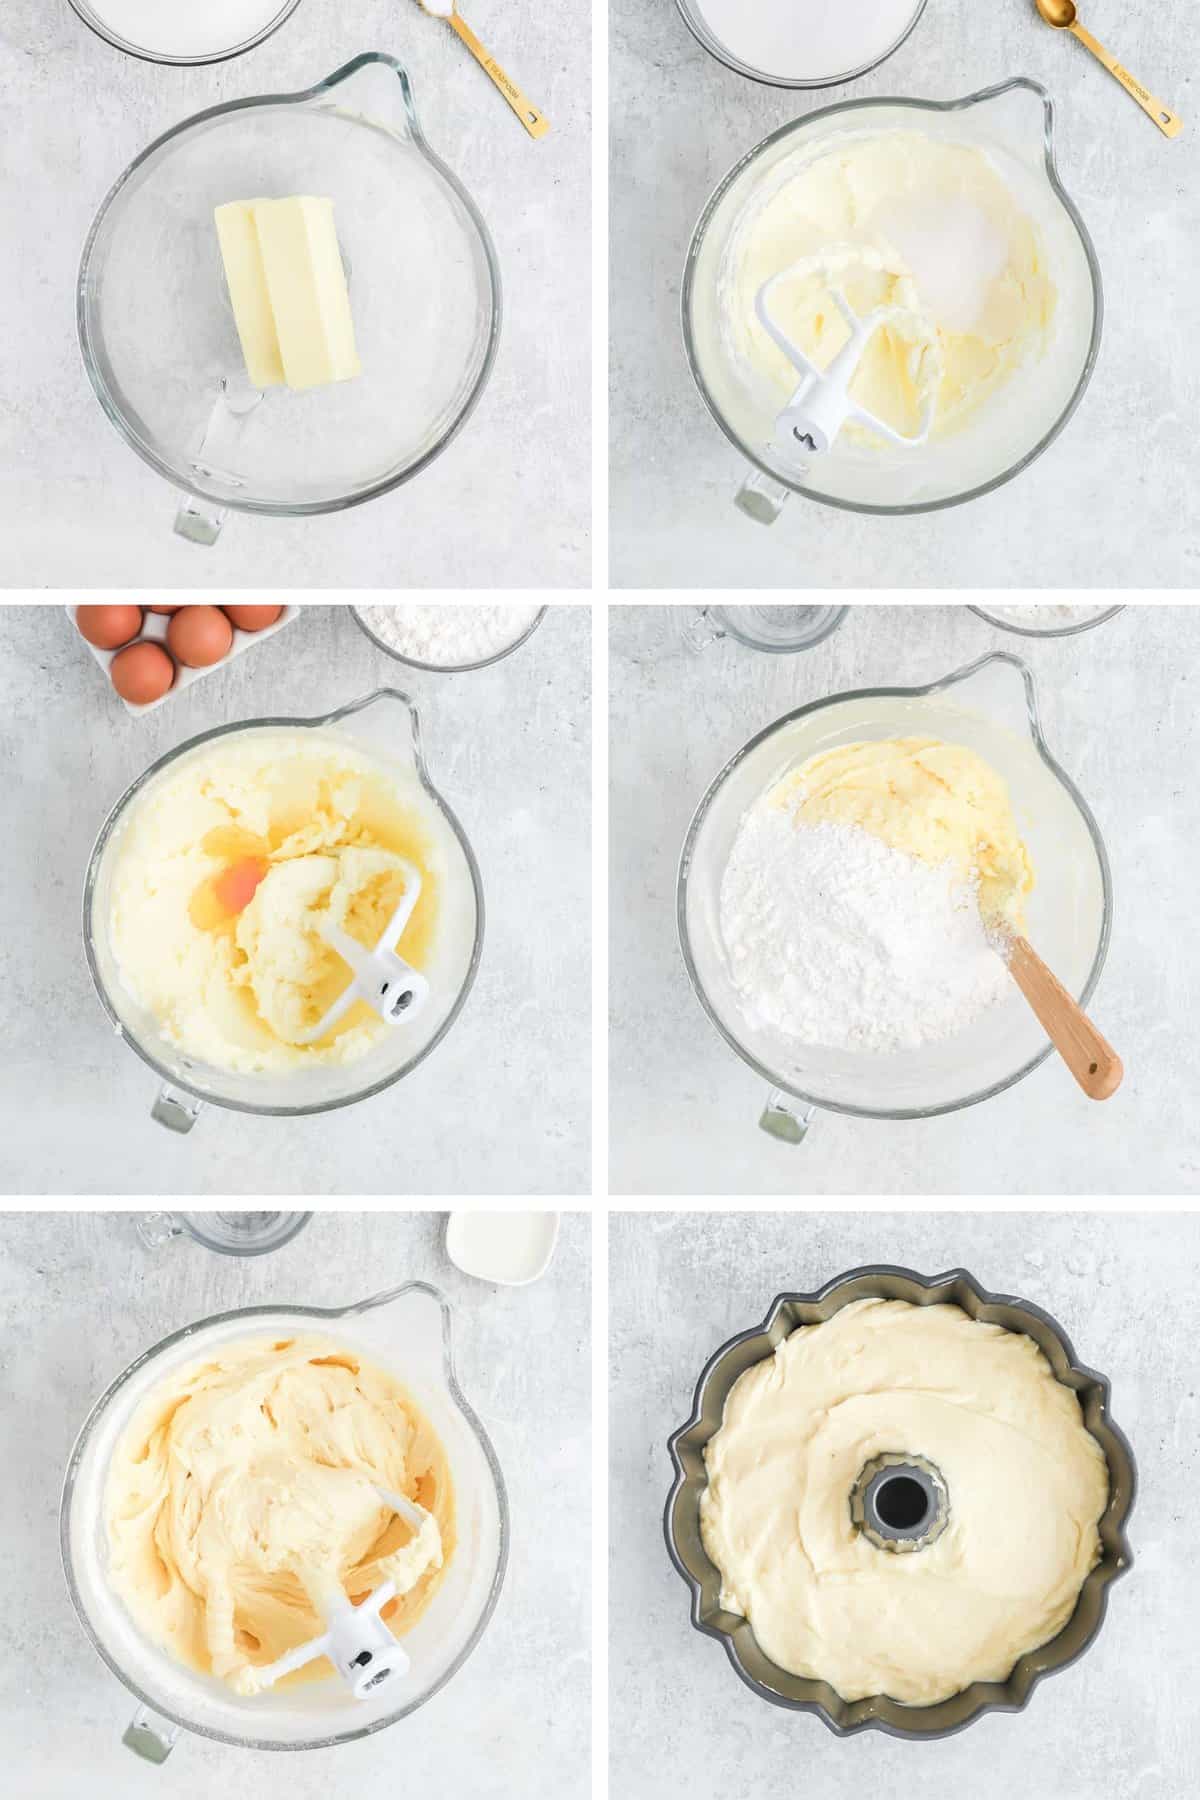 7 up cake step by step photos in a collage.